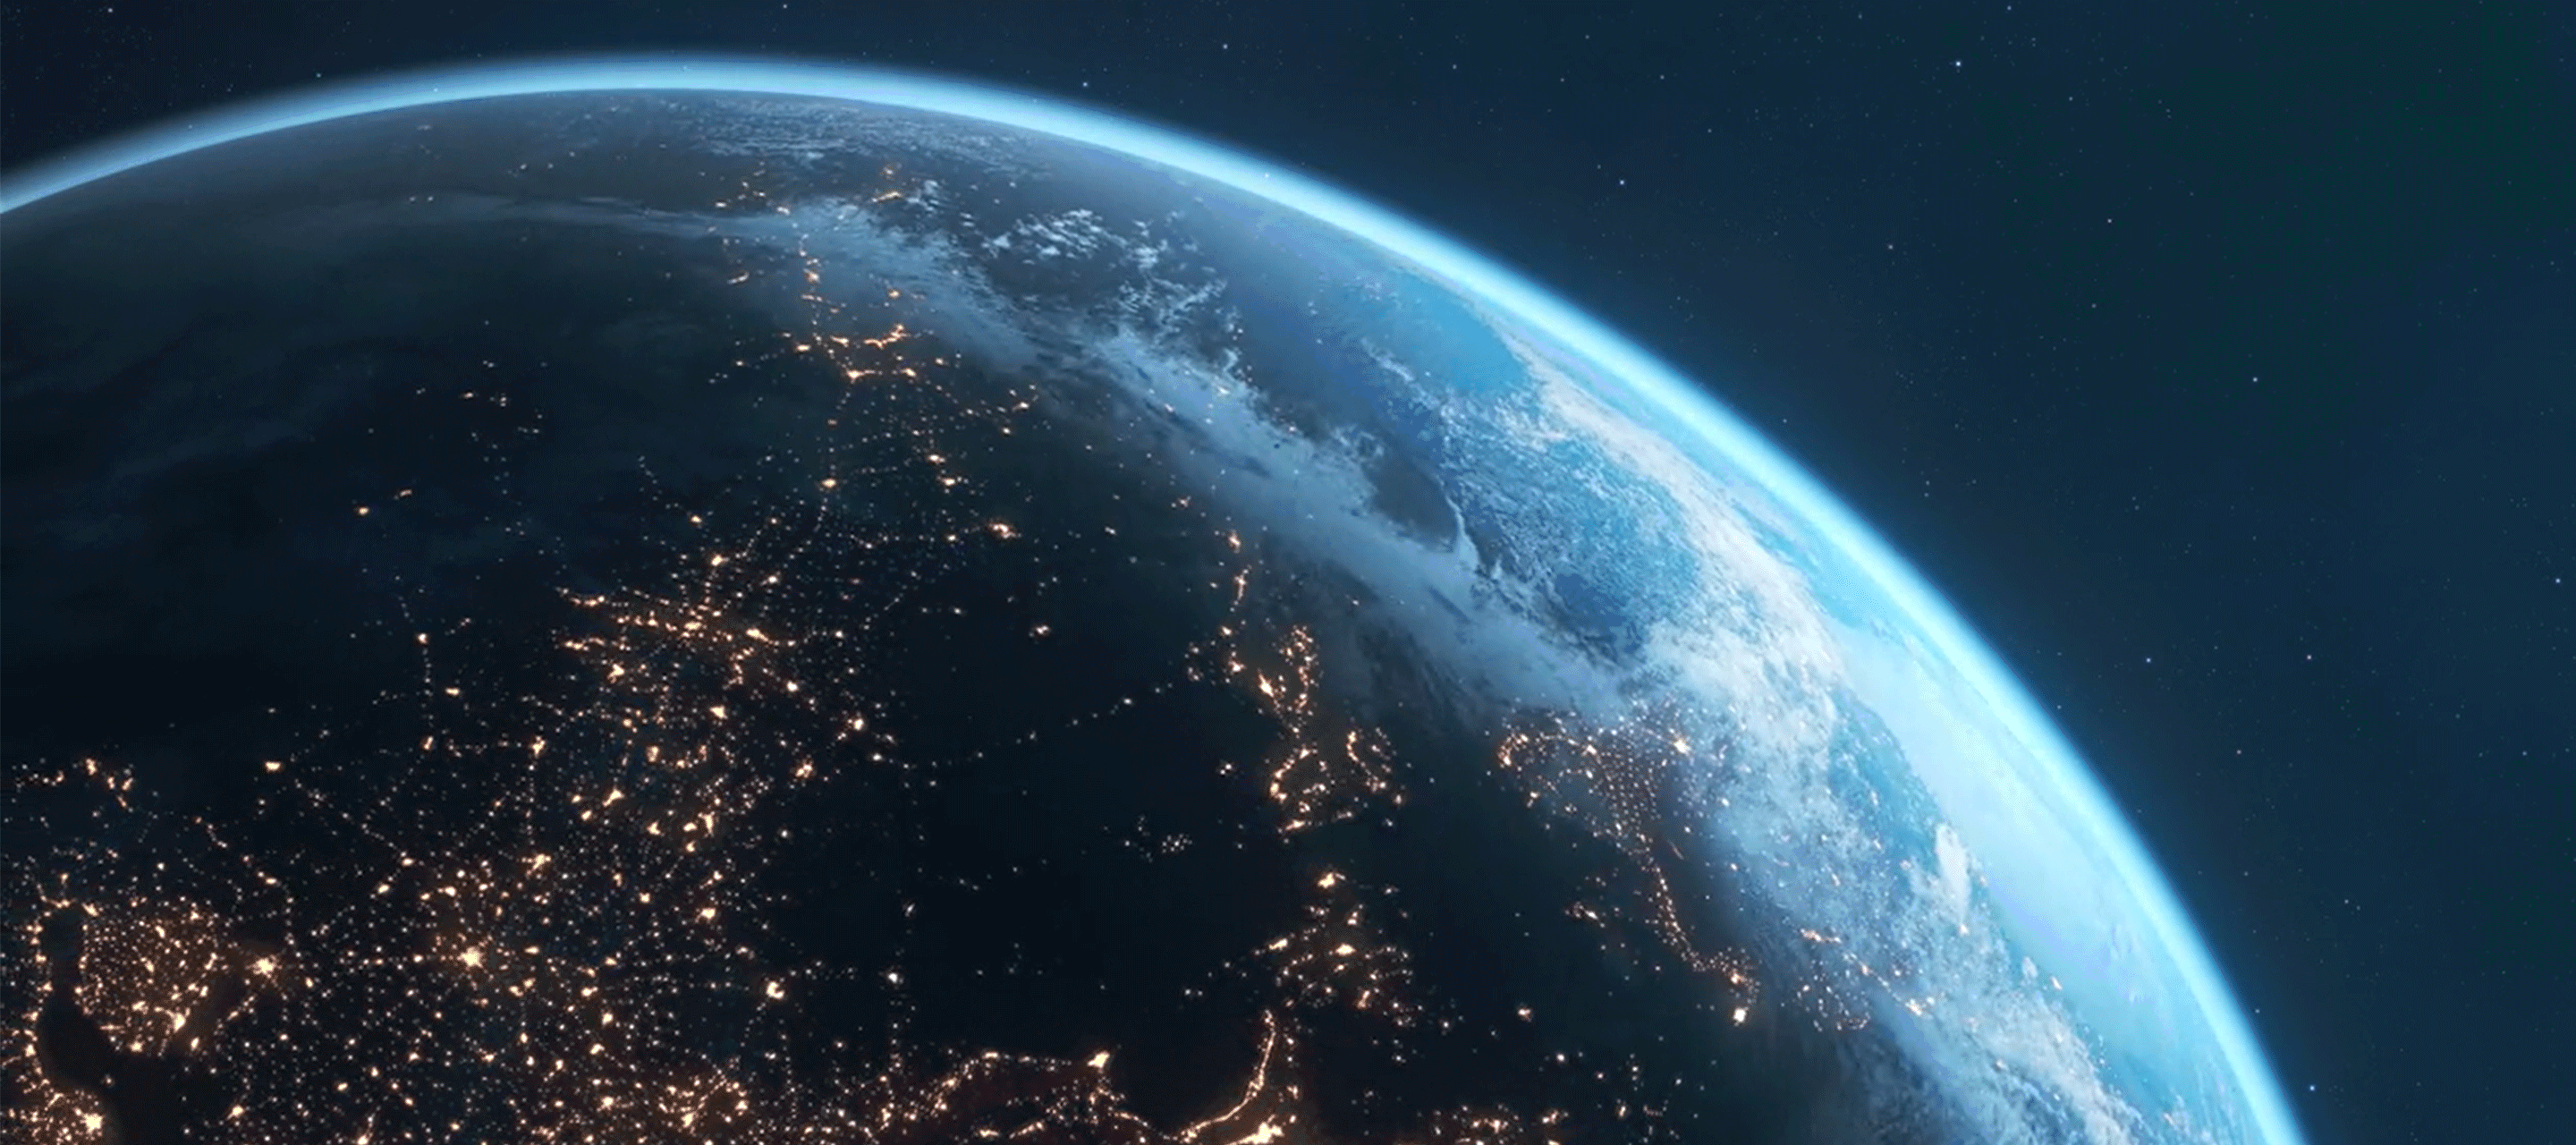 image shows earth from space